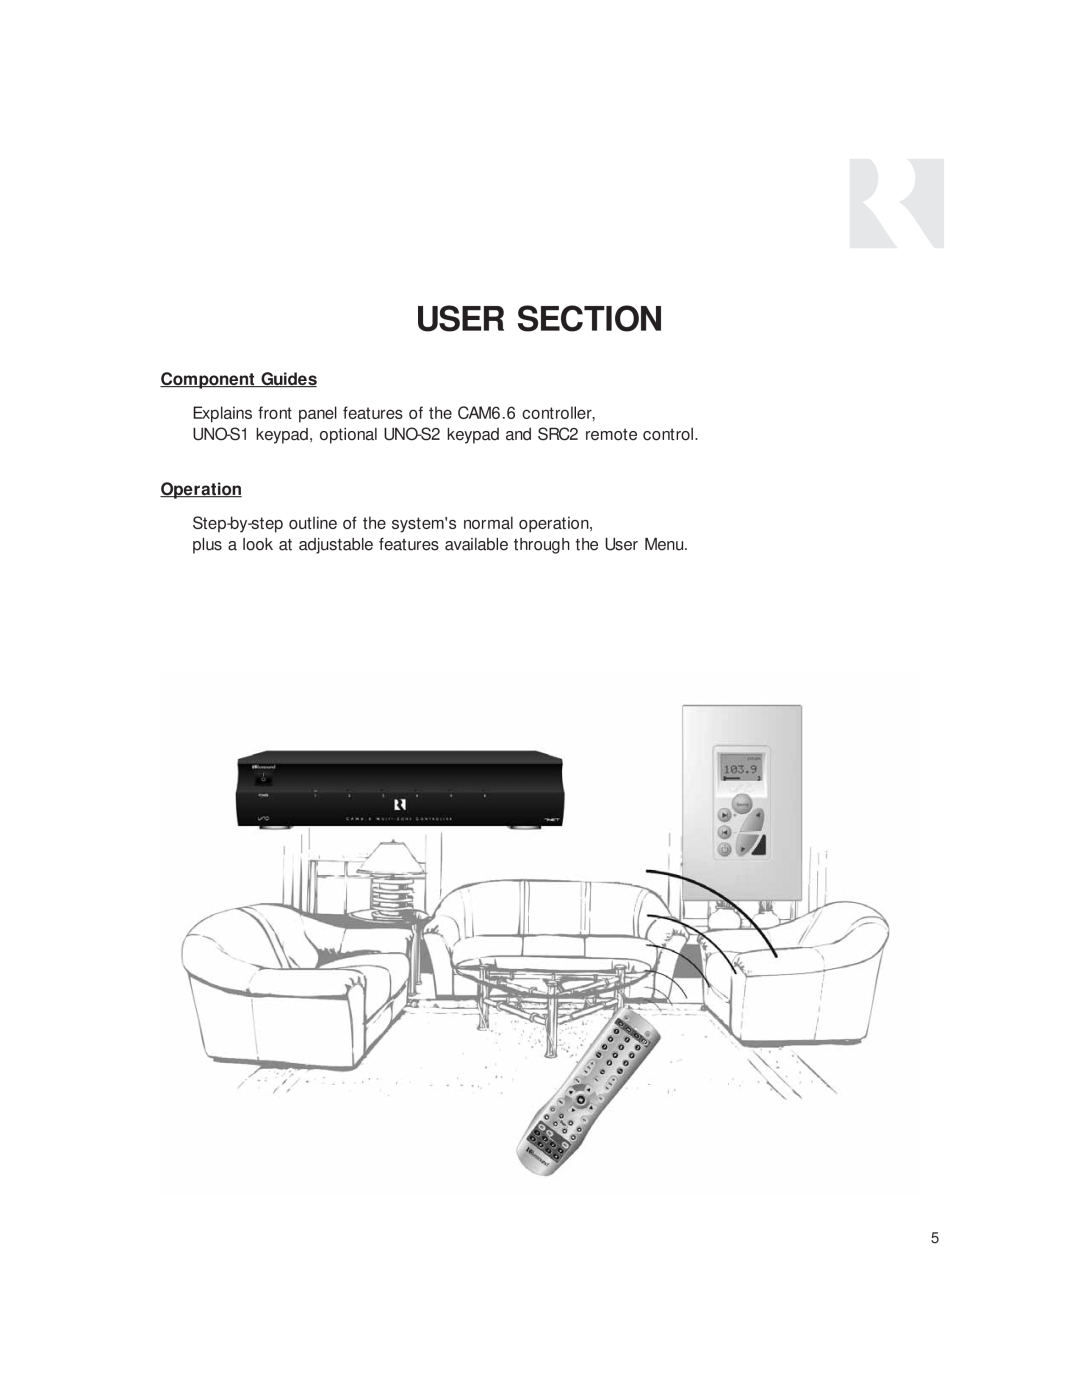 Russound CAM6.6T-S1 instruction manual User Section, Component Guides, Operation 